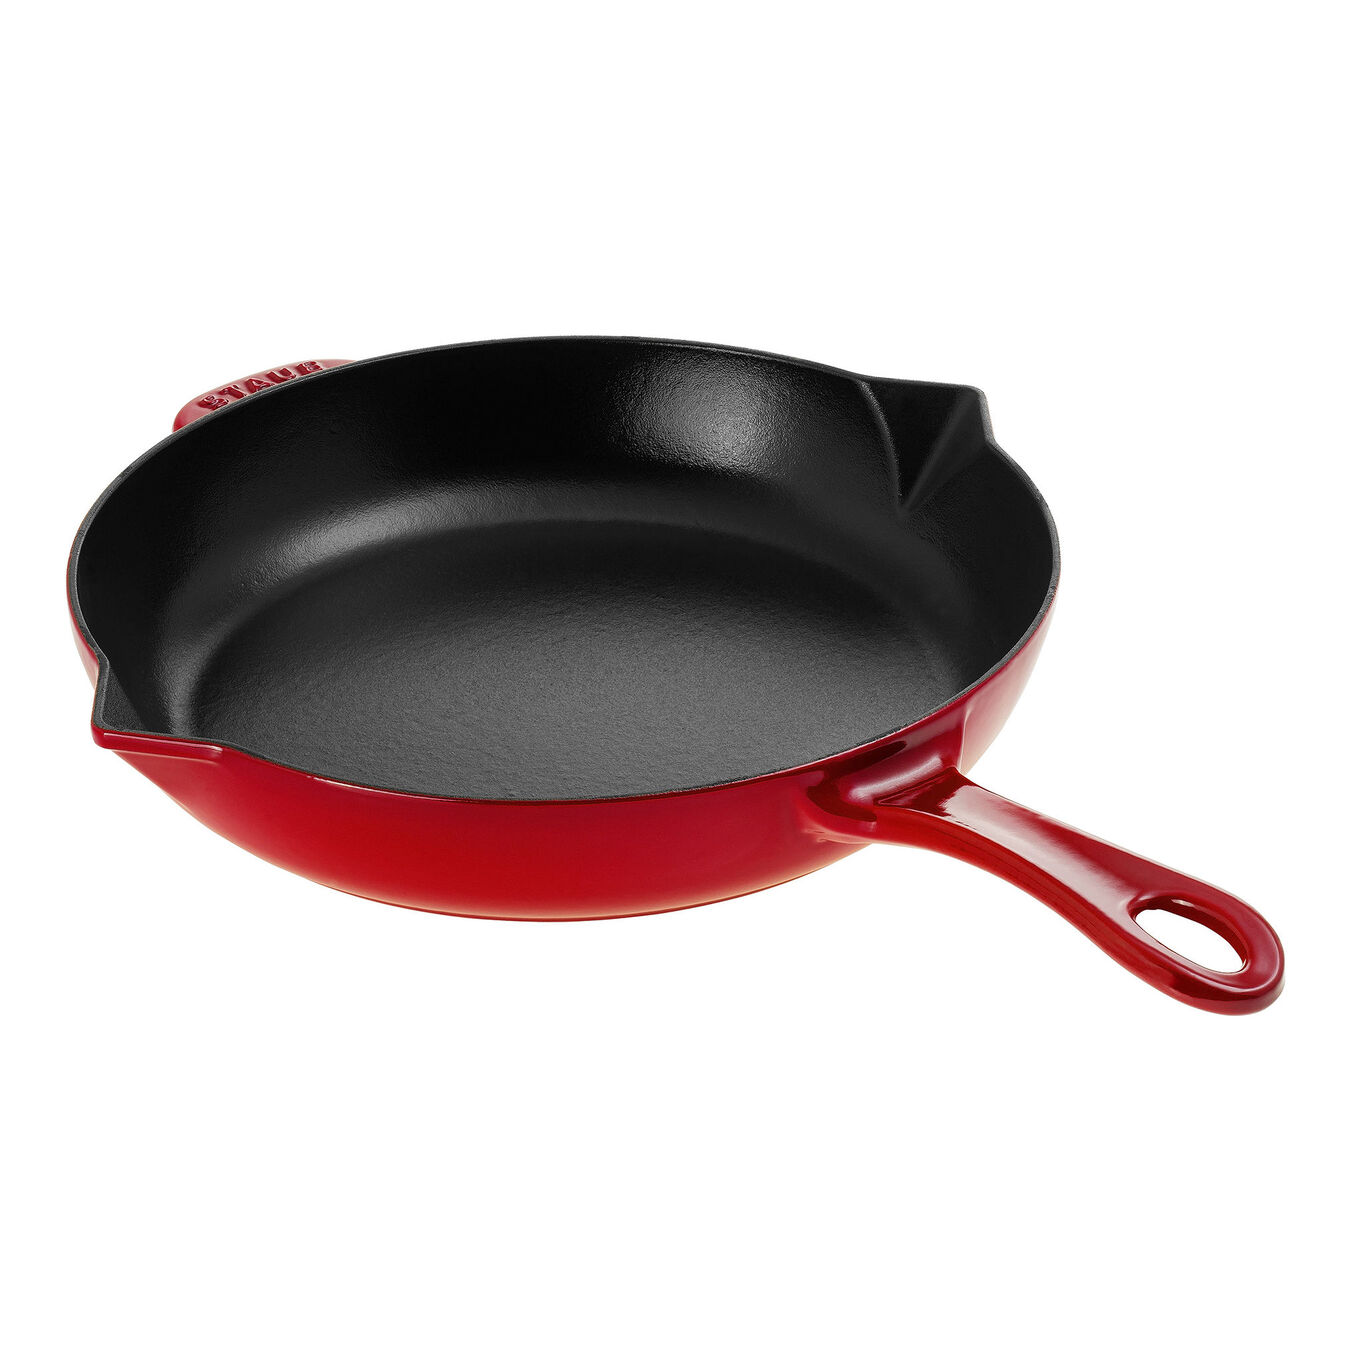 26 cm / 10 inch cast iron Frying pan with pouring spout, cherry - Visual Imperfections,,large 2